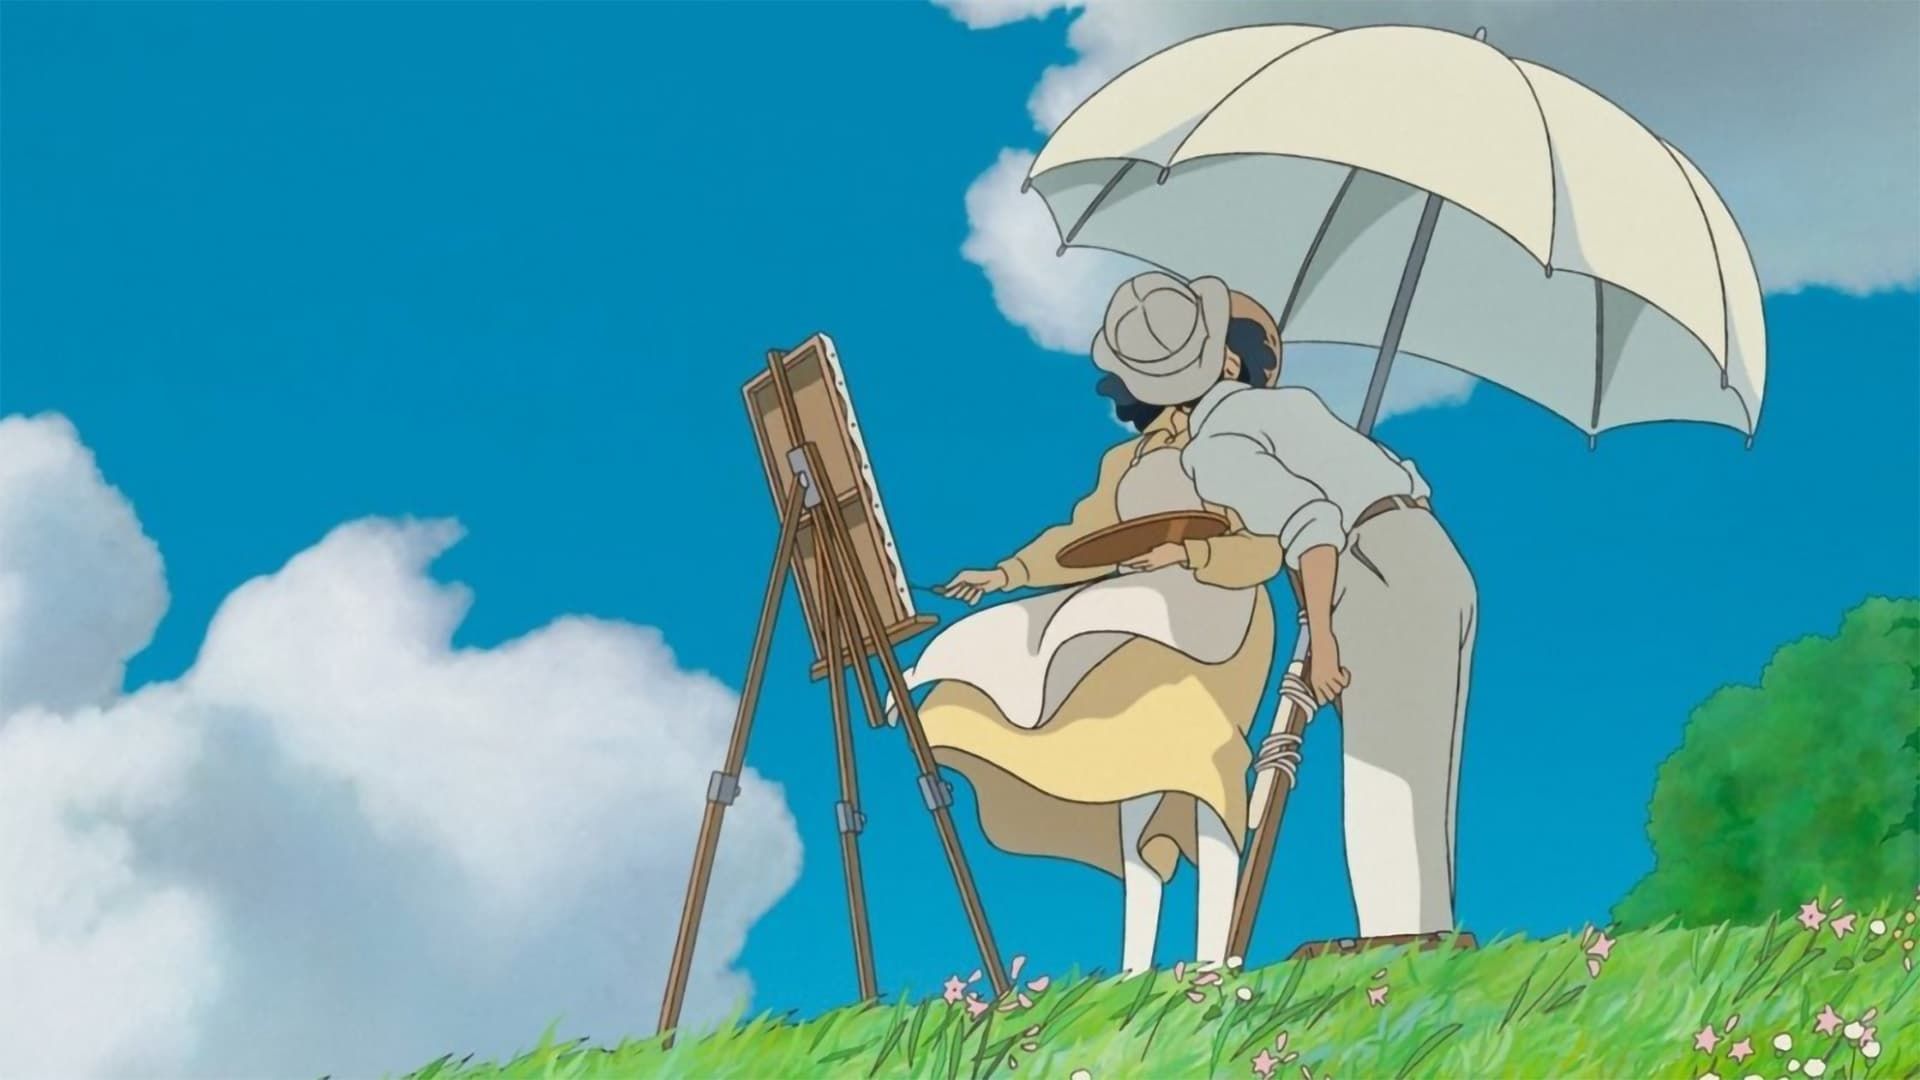 The Wind Rises Backdrop